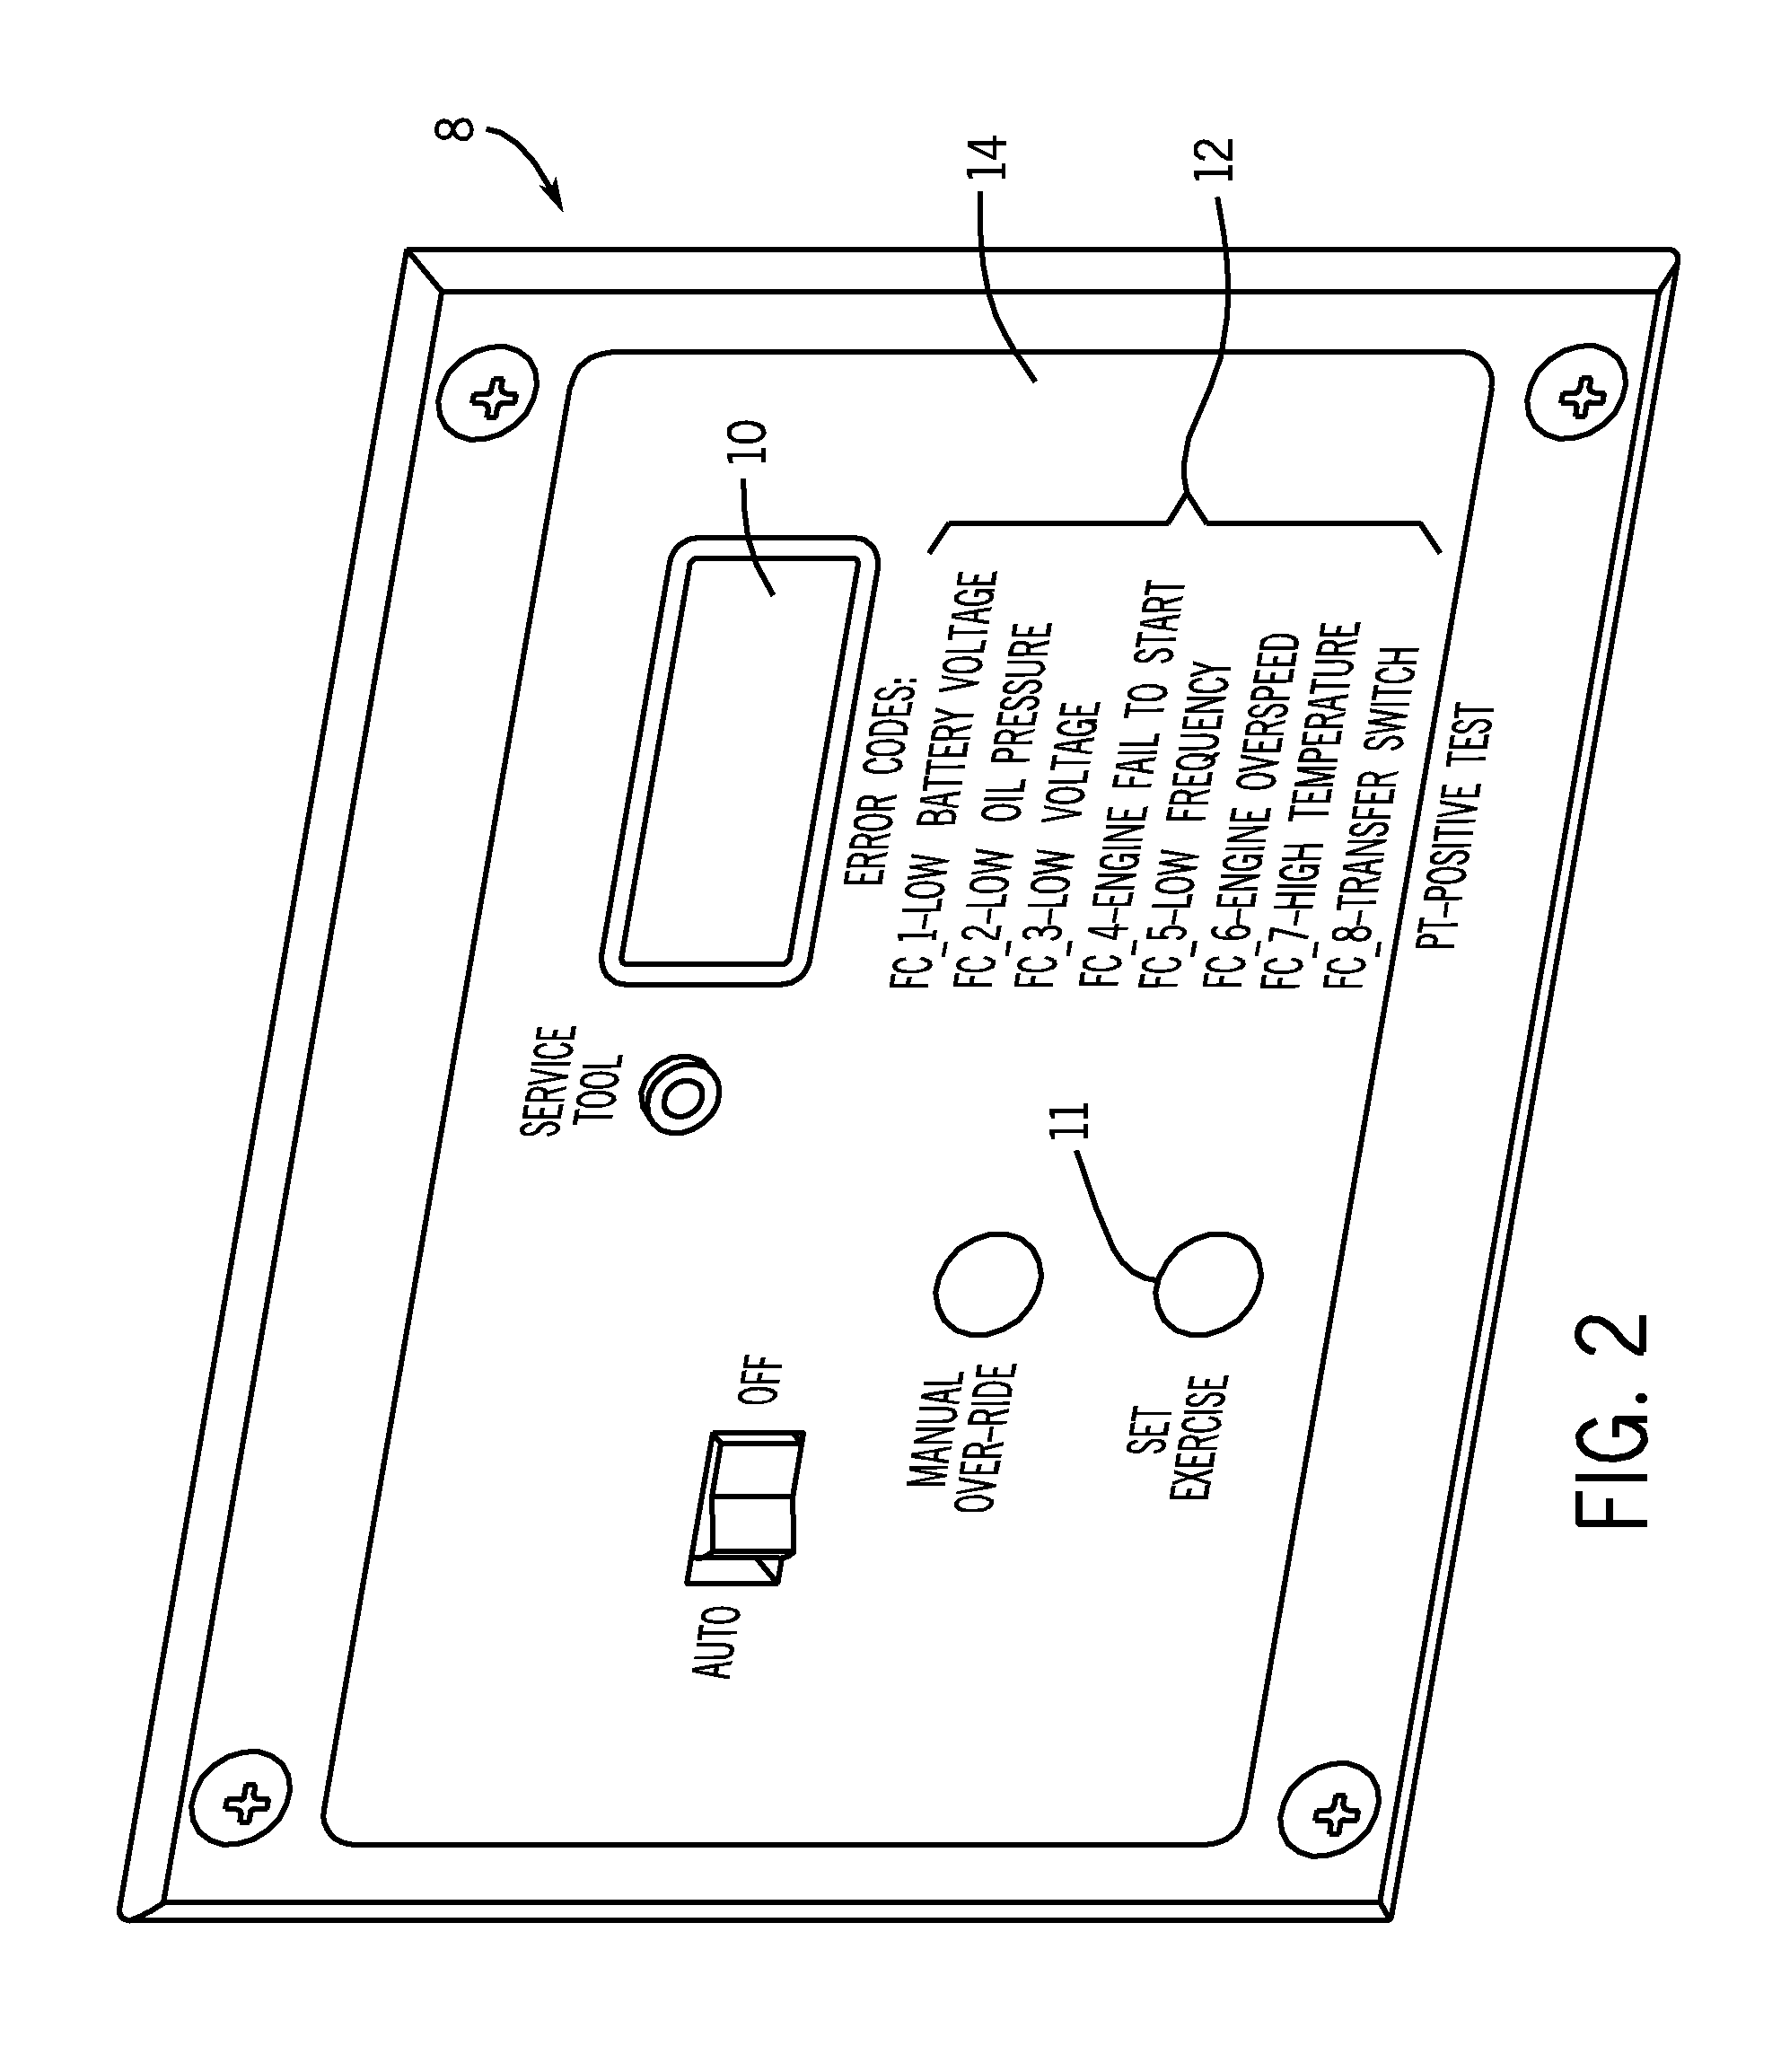 Standby generator with weather alert receiver and method of operation